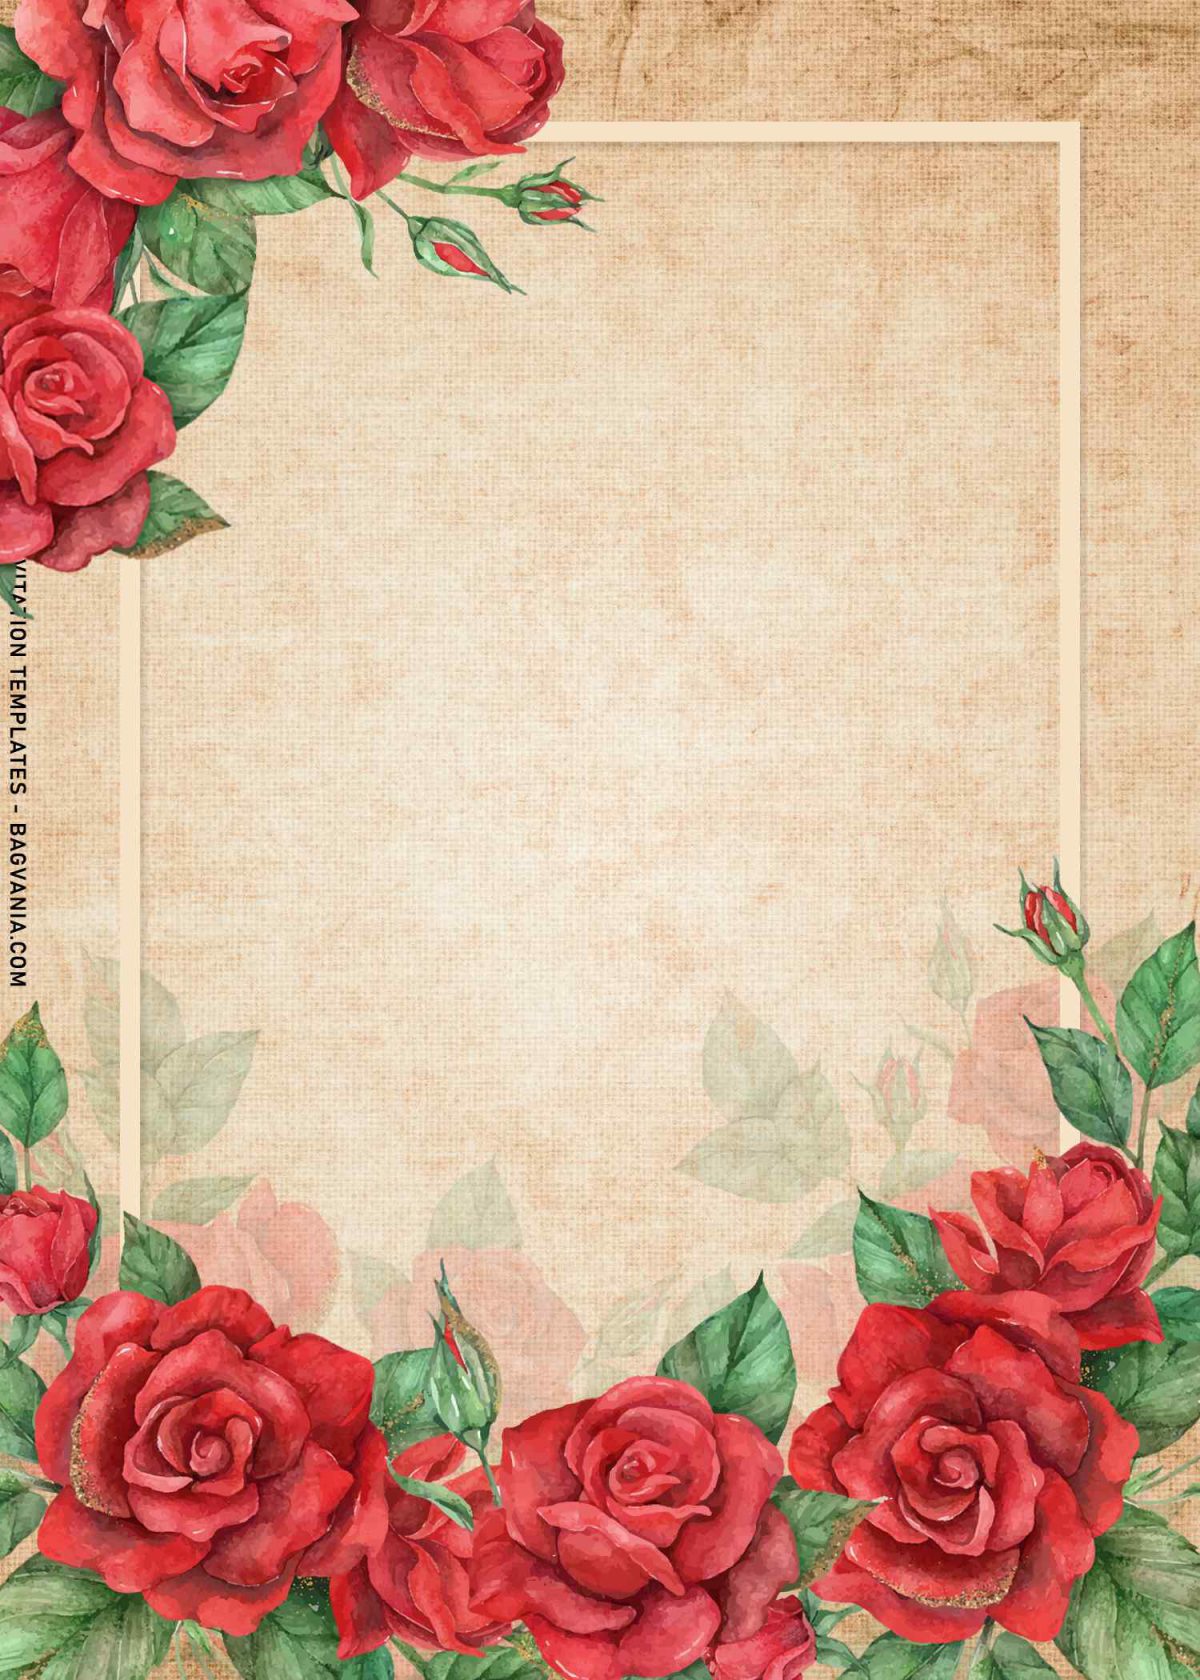 7+ Attractive Vintage Floral Birthday Invitation Templates with elegant roses